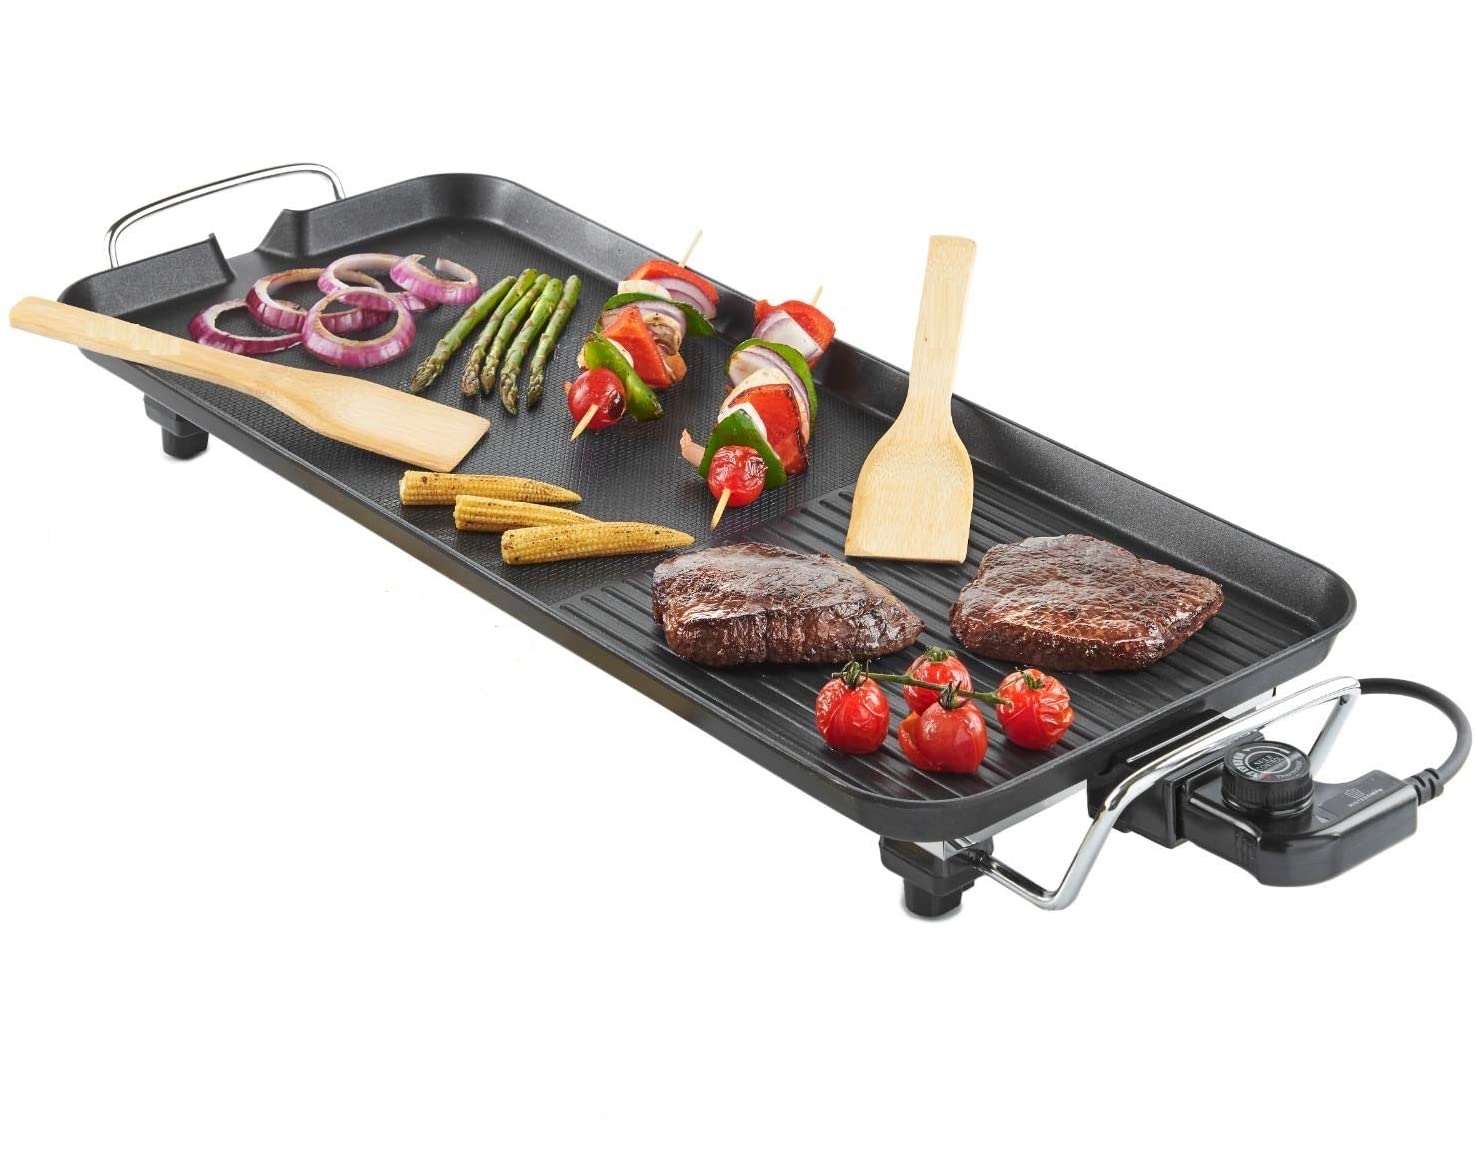 SINGES Large Electric Teppanyaki Grill Griddle with 27 x 11 inch Hot Plate - Adjustable Temperature Control - Electric BBQ Table Grill - Non Stick Hot Plate - Oil Drip Tray - image 1 of 8